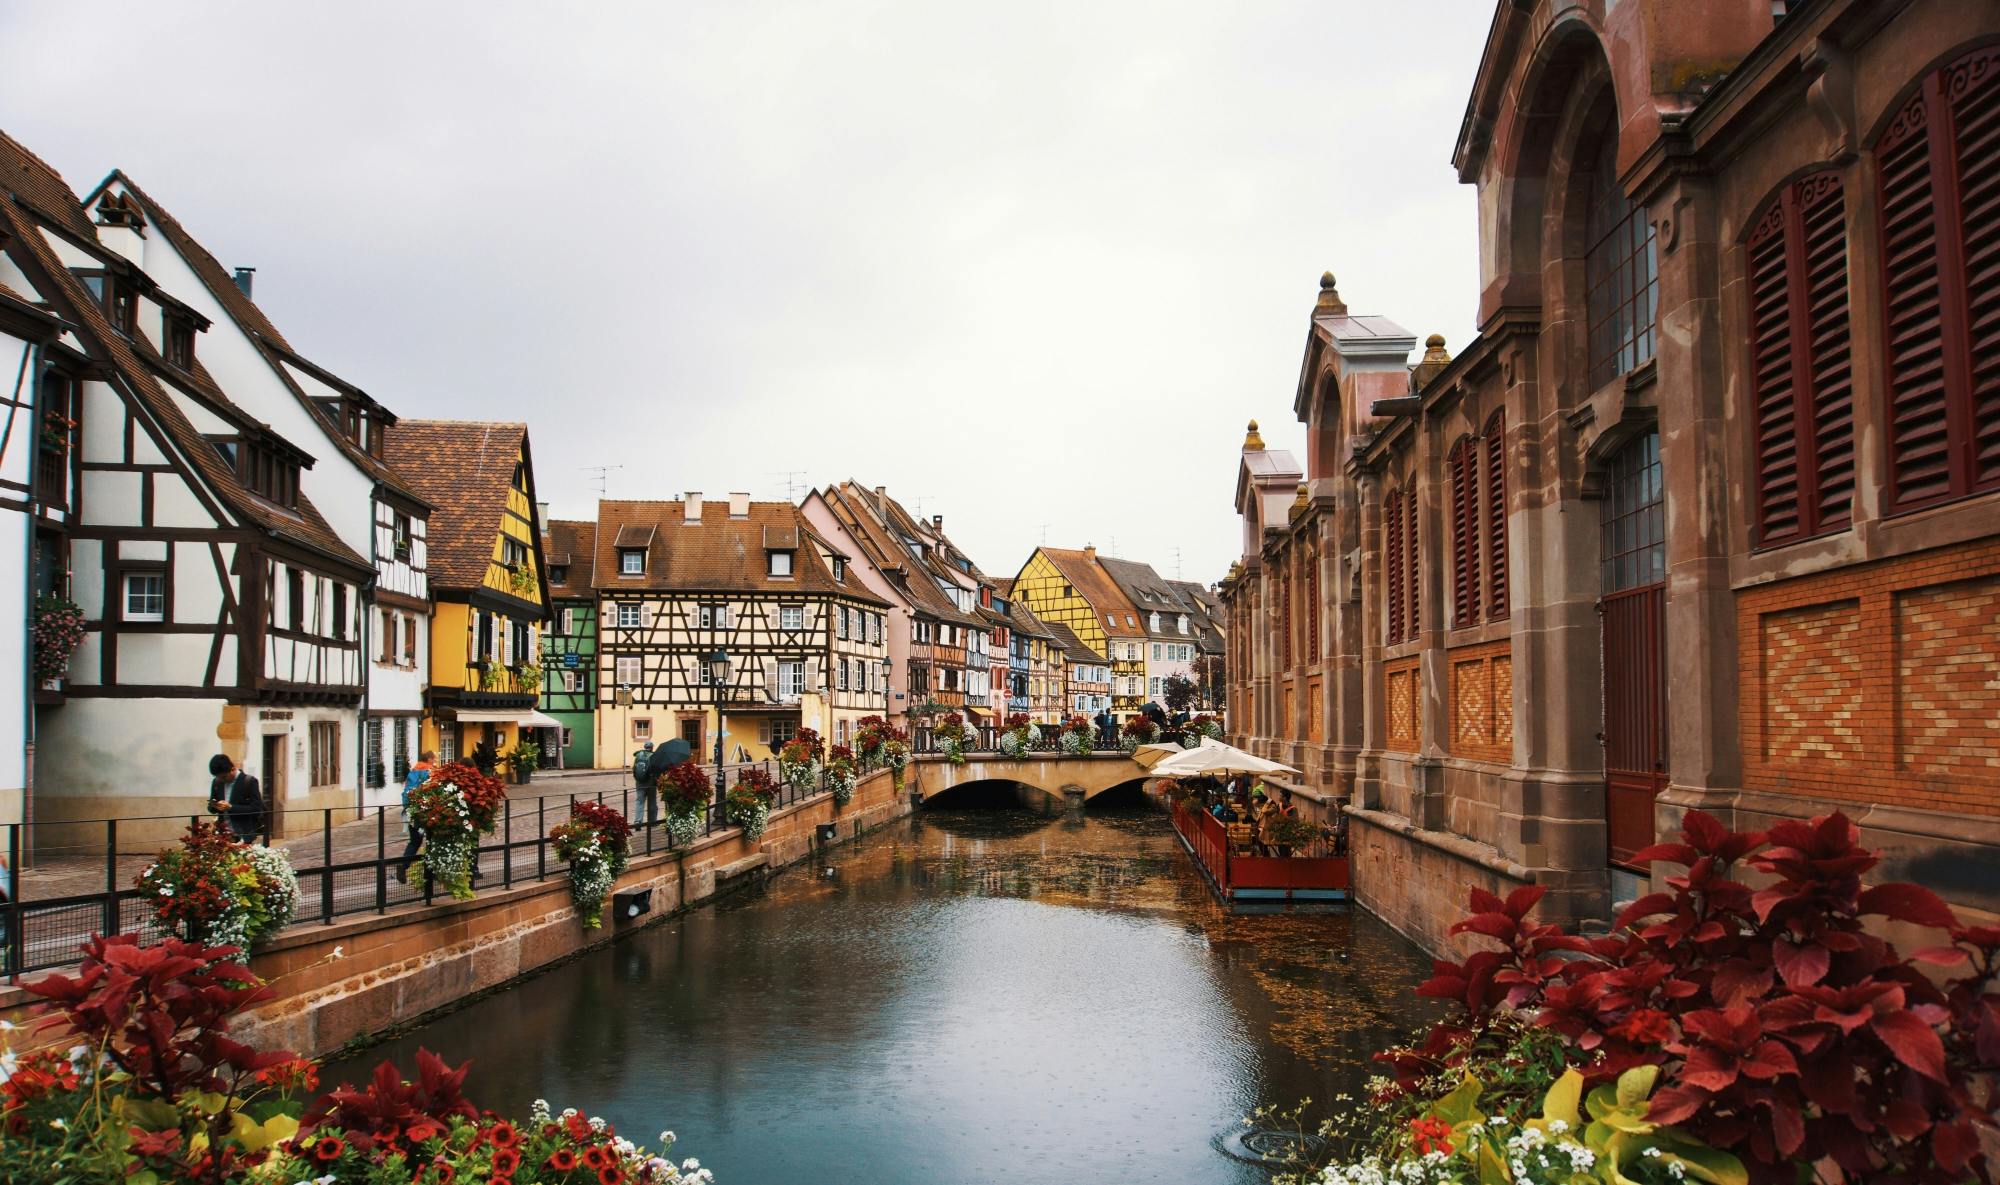 60 minutes walking tour in Colmar with a Local